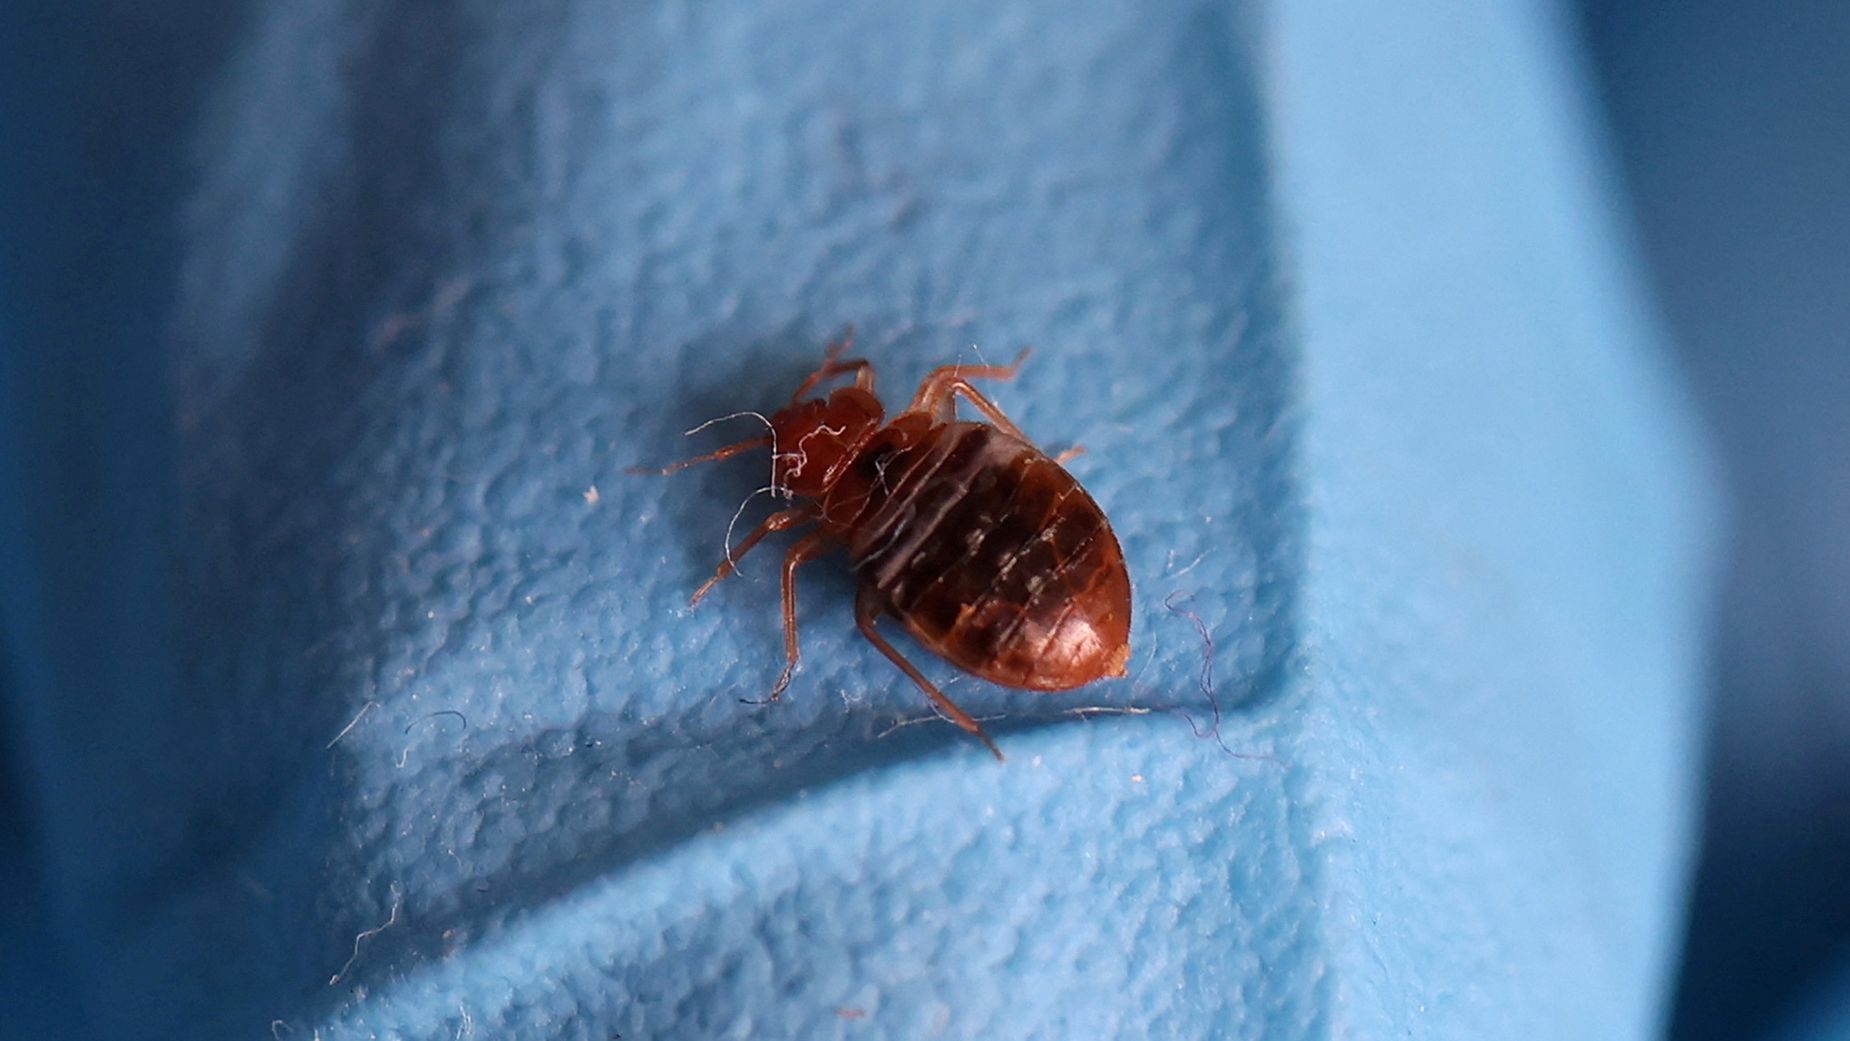 What you need to know about Europe's bedbug panic